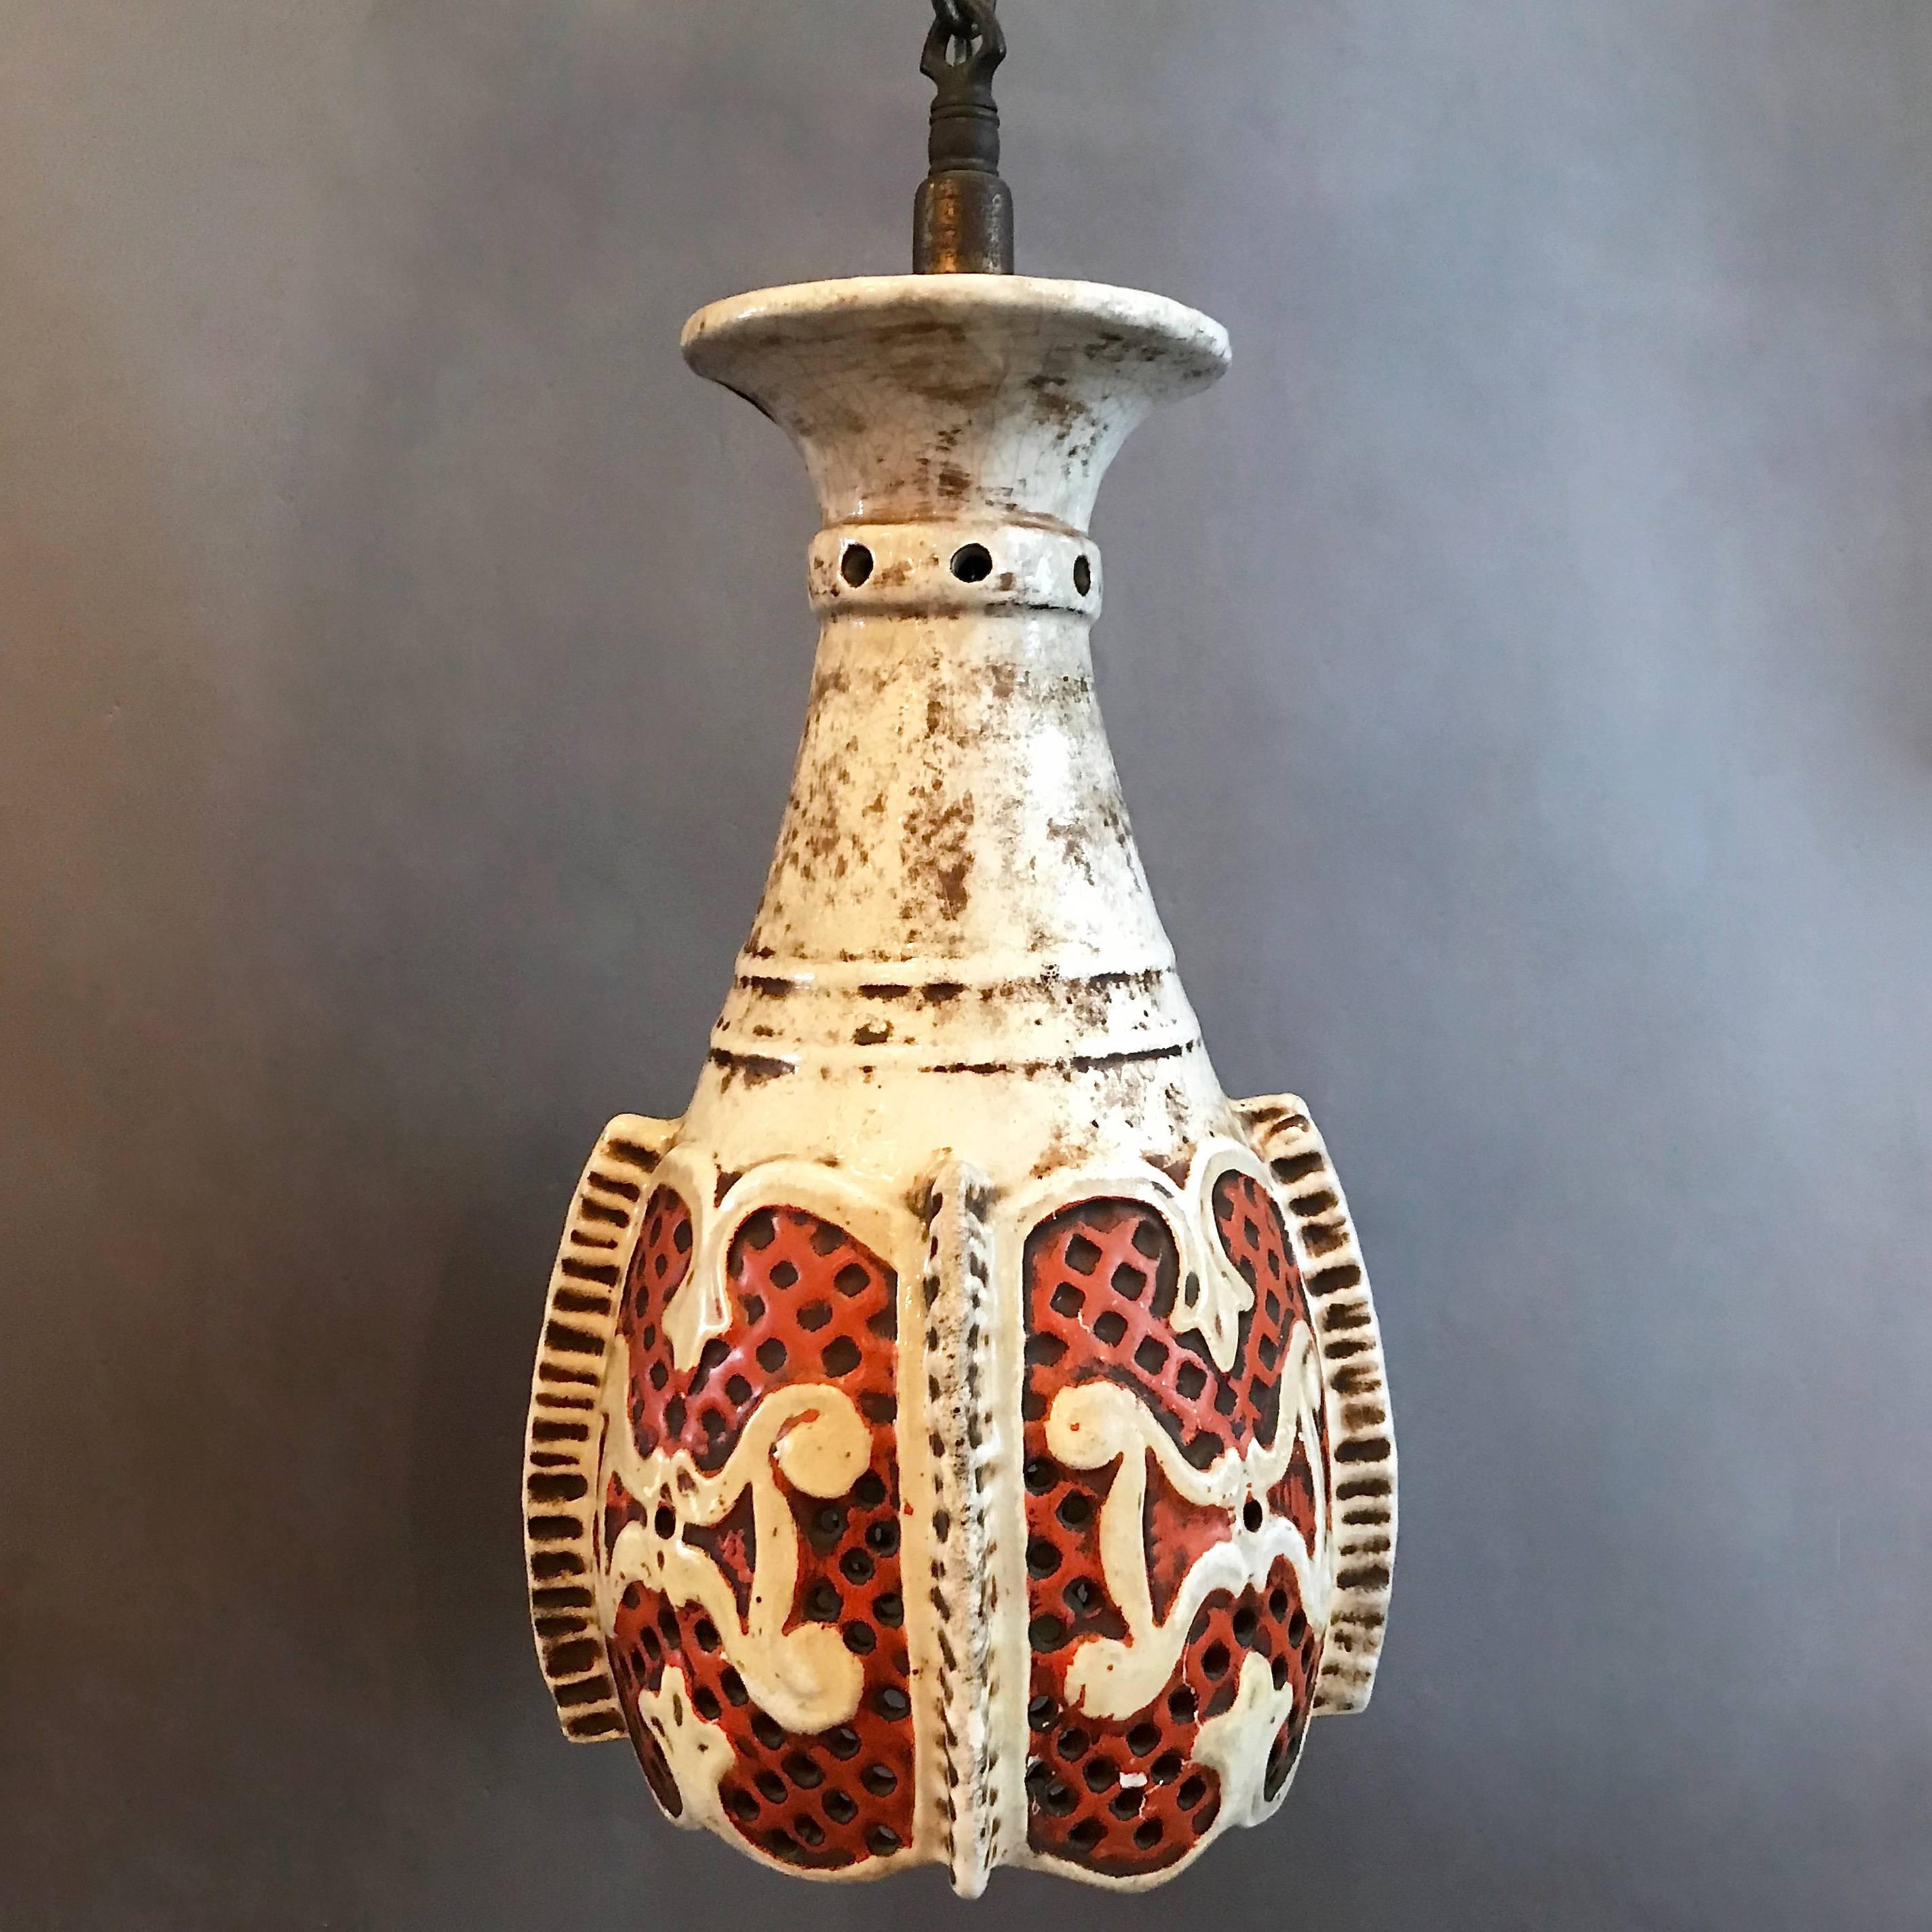 Vintage, midcentury, Moorish pendant light features a patinated, white and deep orange ceramic shade with perforated body on a brass fitter and chain. This light has been rewired for 150 watts bulb with 16 in of chain.